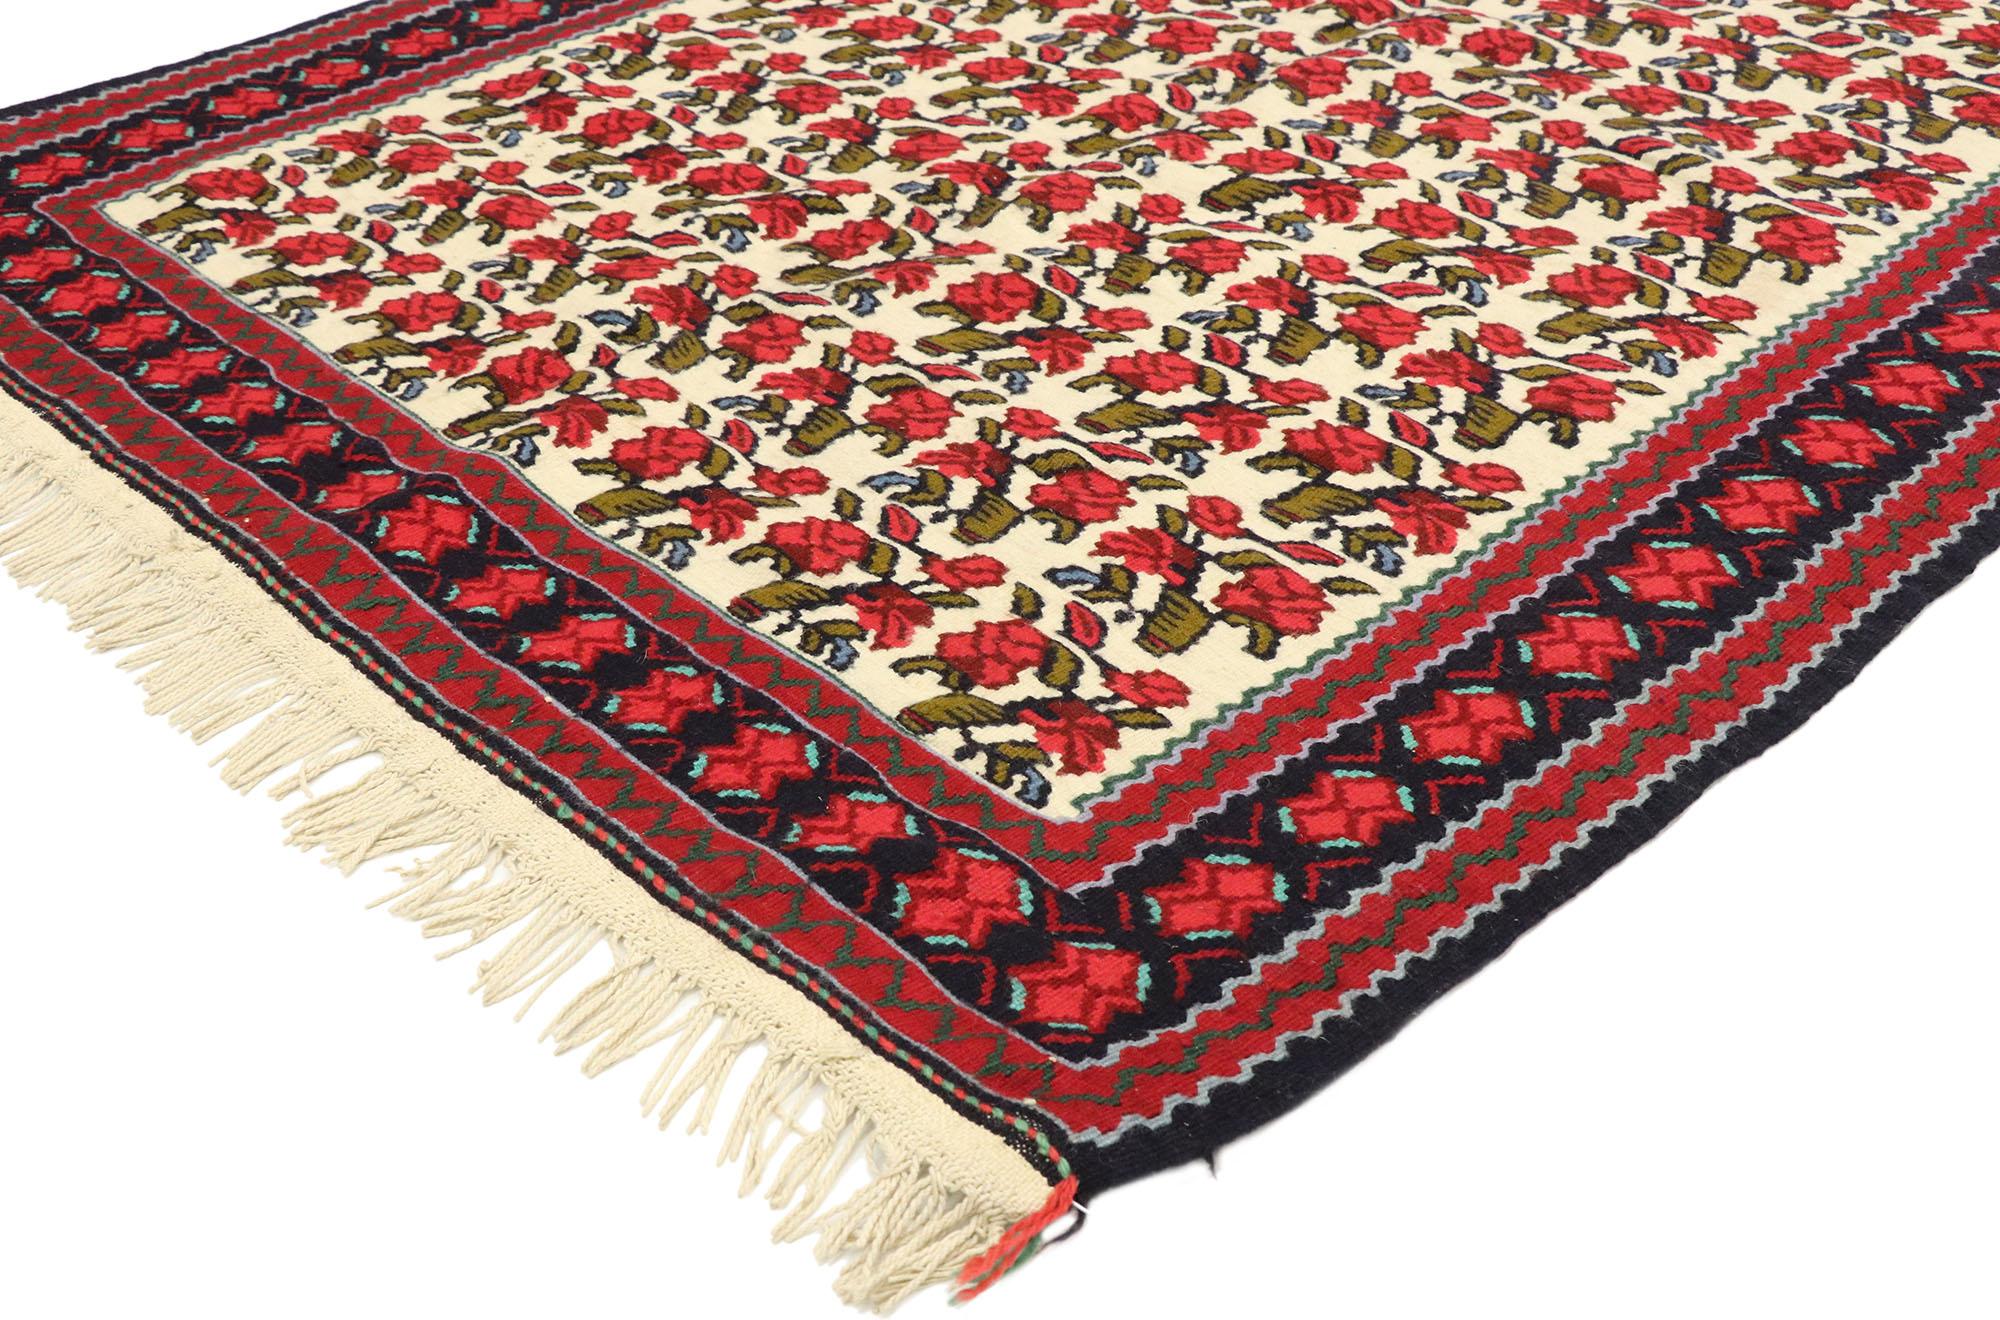 71900, vintage Persian Floral Kilim rug with English Tudor Manor House style. Warm and inviting combined with romantic connotations, this handwoven wool vintage Persian floral kilim rug beautifully embodies an English Tudor Manor House style. The